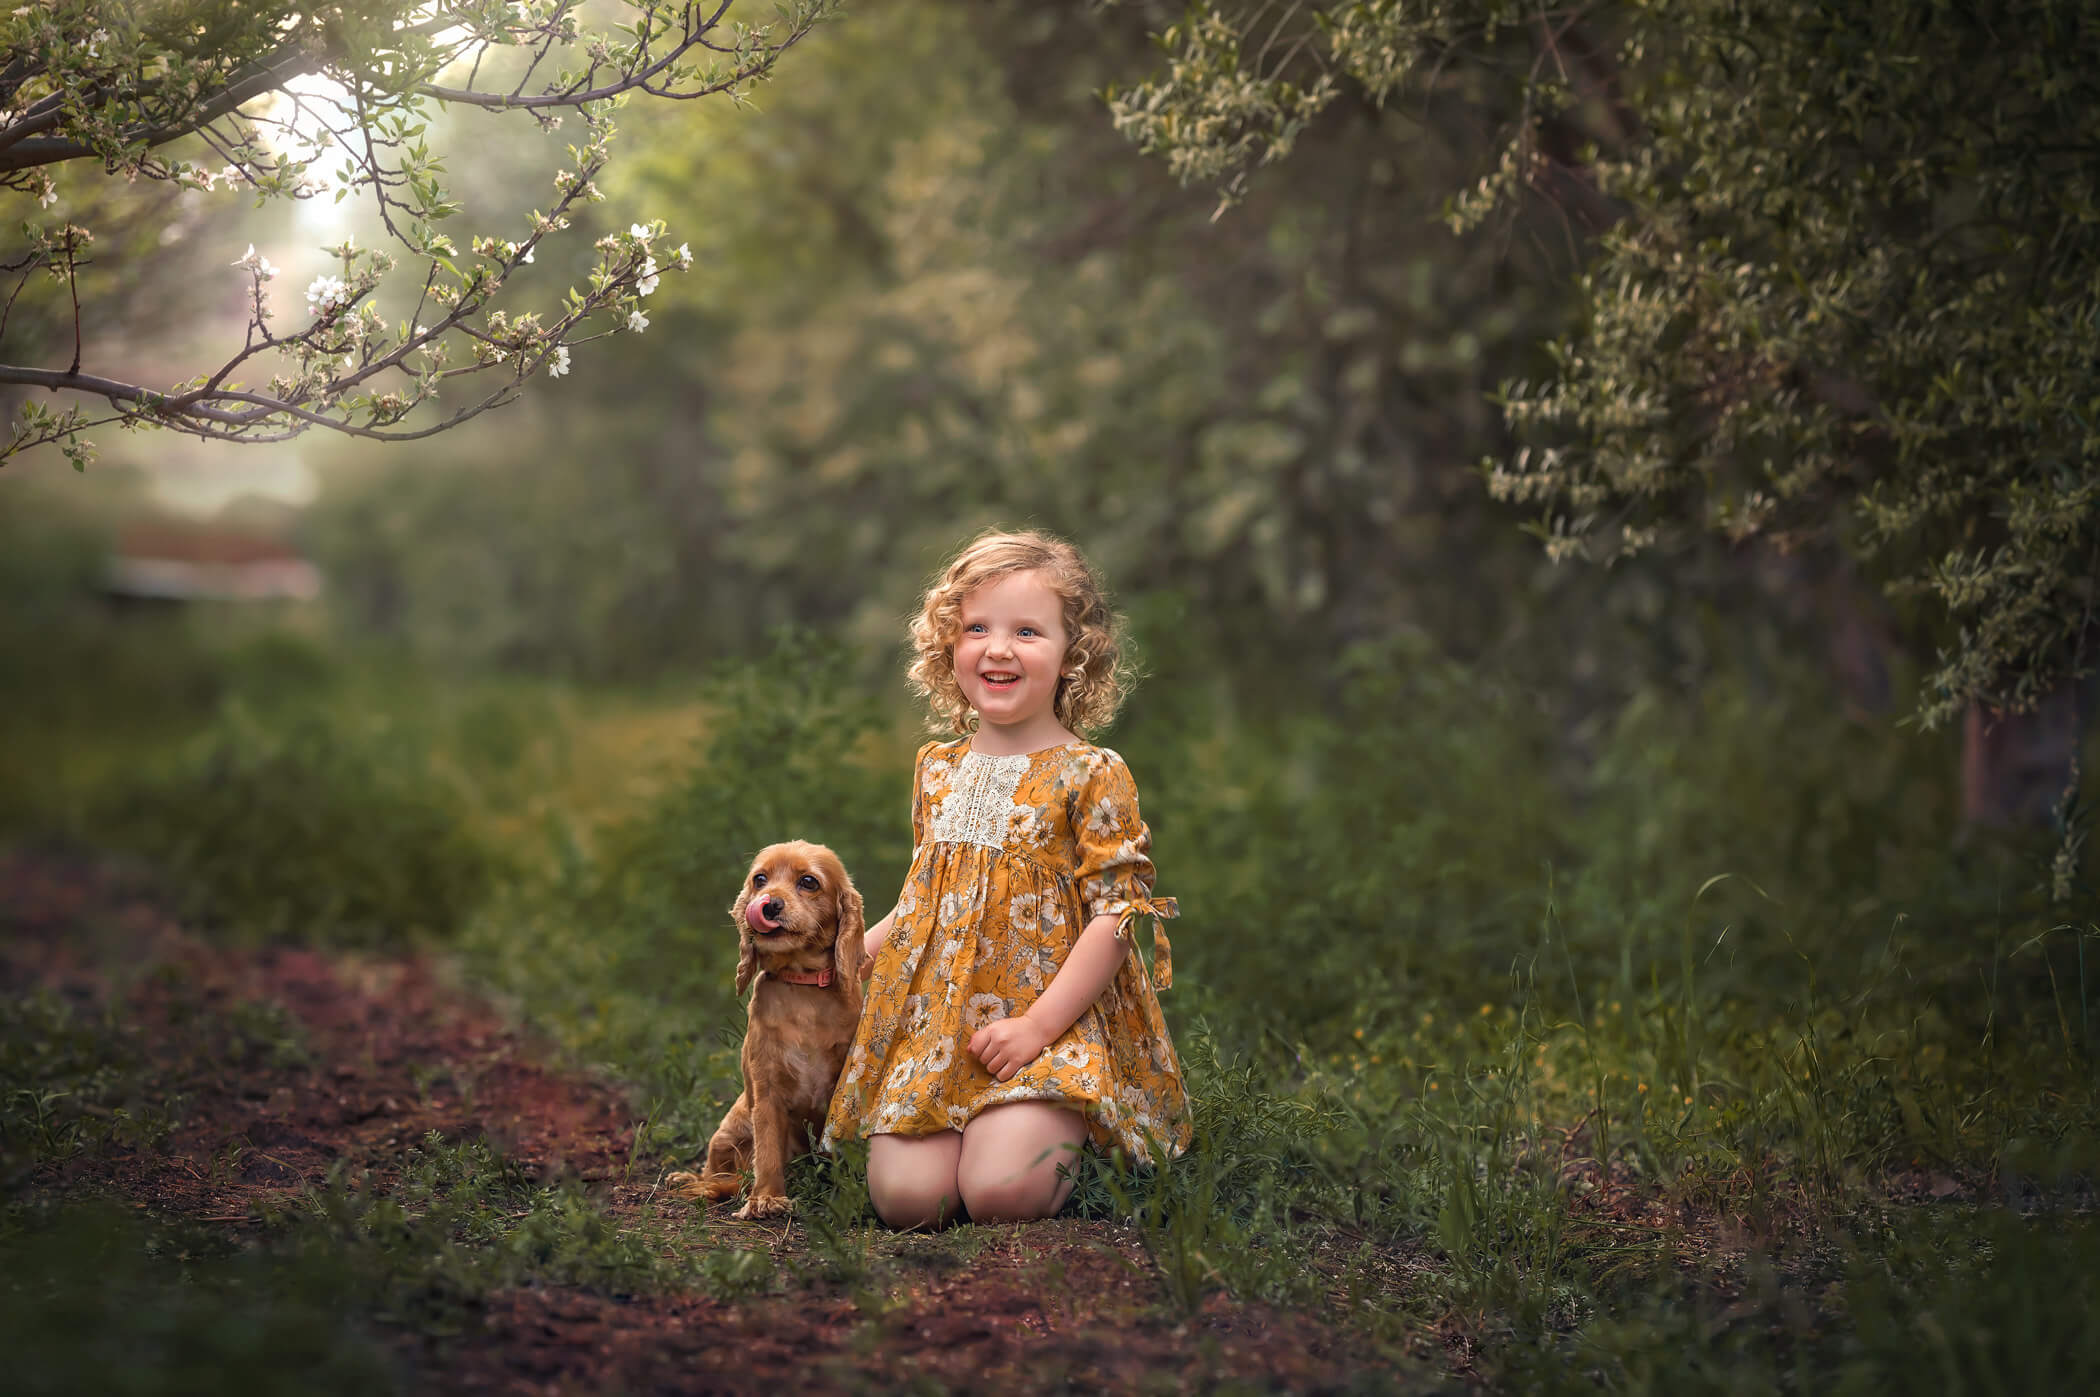 5 year old girl with her dog during outdoor photoshoot